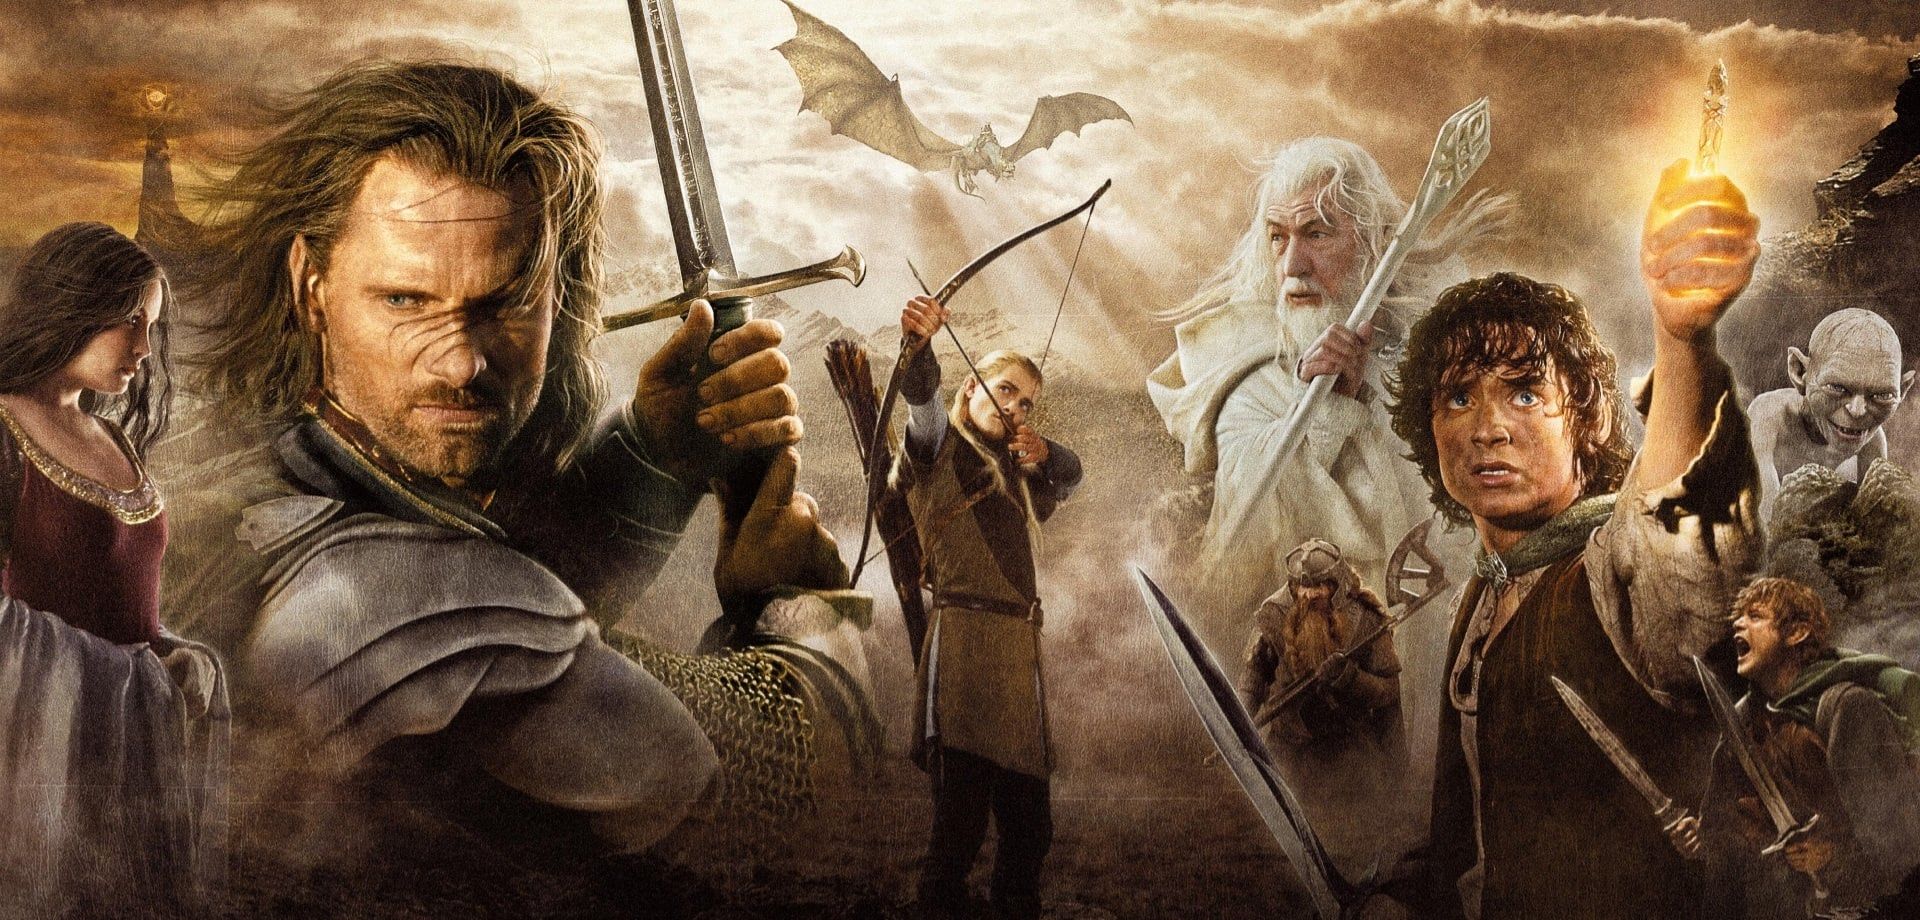 The Lord of the Rings: The Return of the King - Netflix